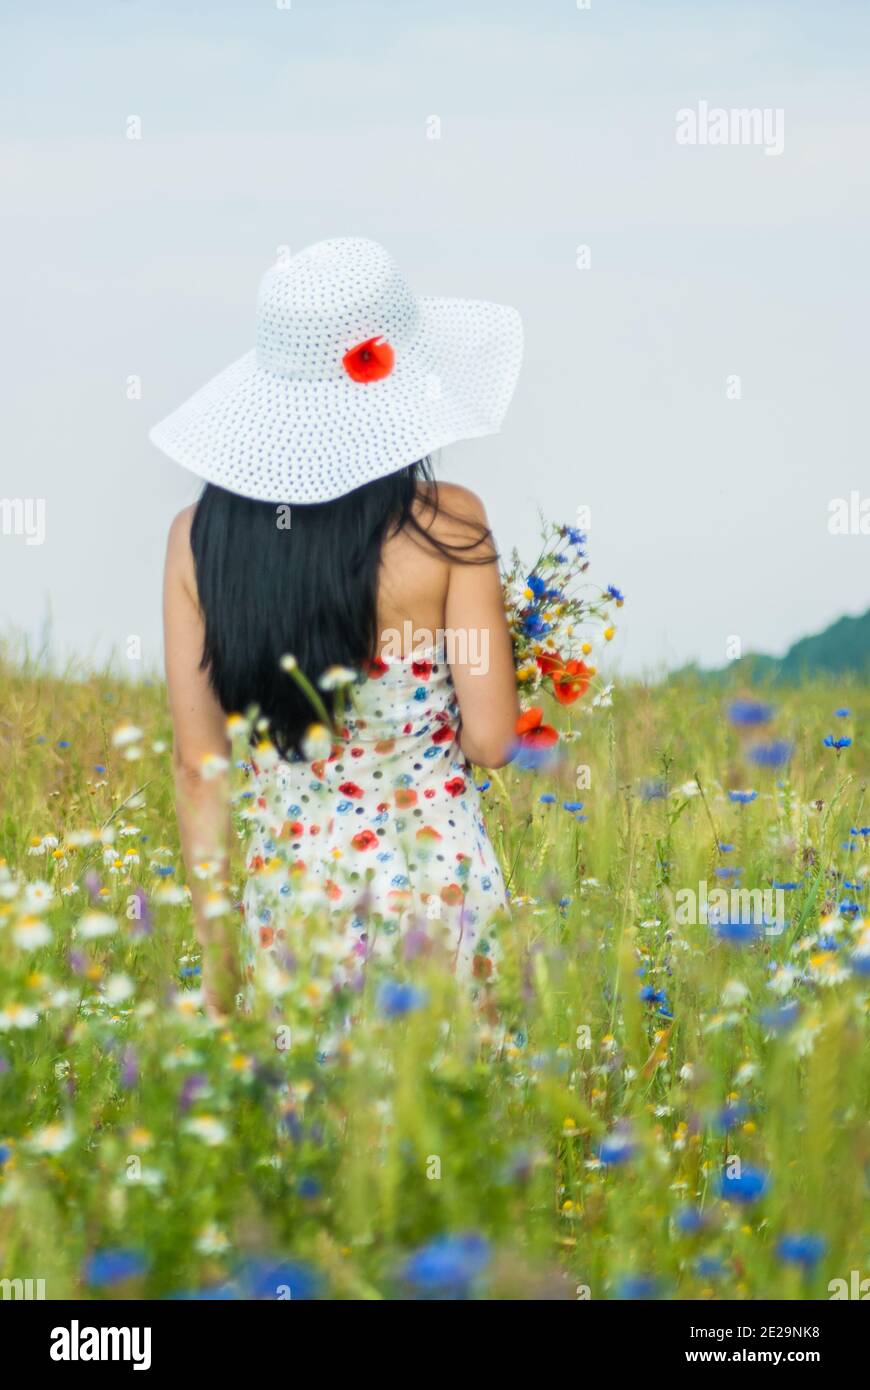 Girl in a dress and a white hat stands in a field with a bouquet of wildflowers Stock Photo